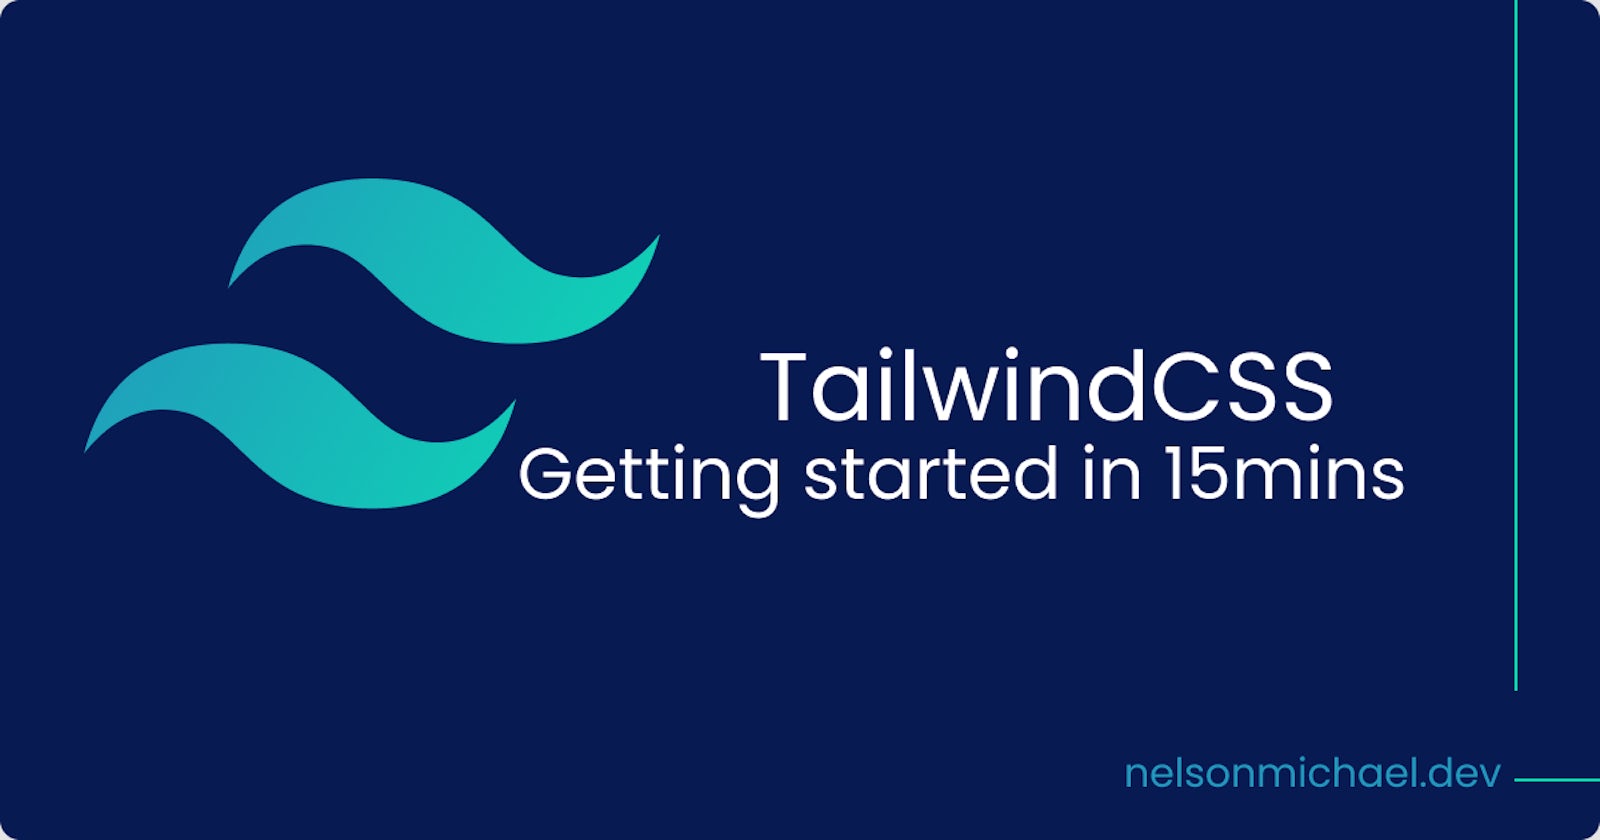 TailwindCSS Tutorial - Getting started in 15mins